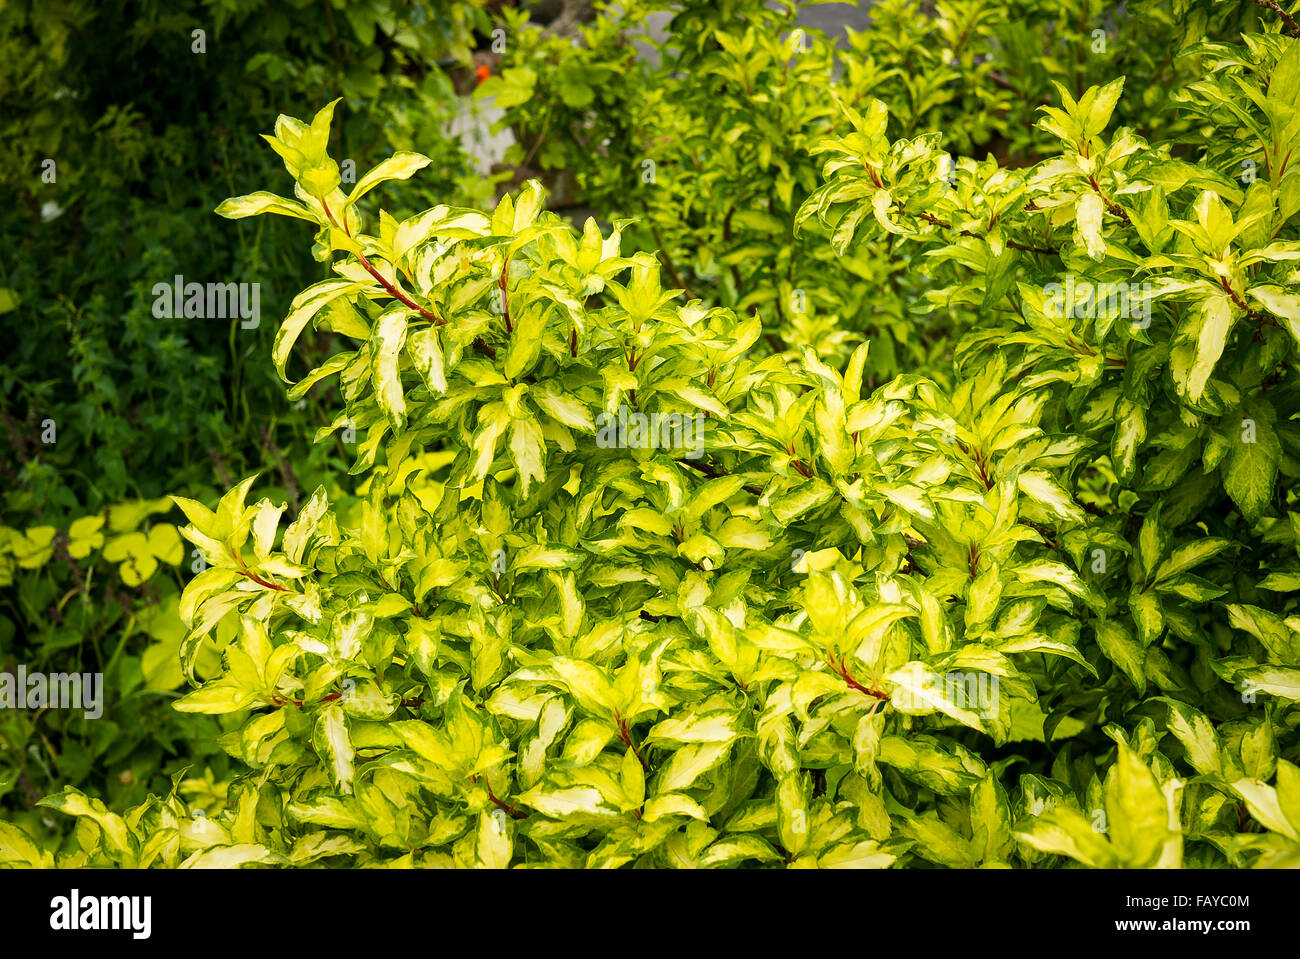 A mass of variegated leaves on a forsythia shrub Stock Photo